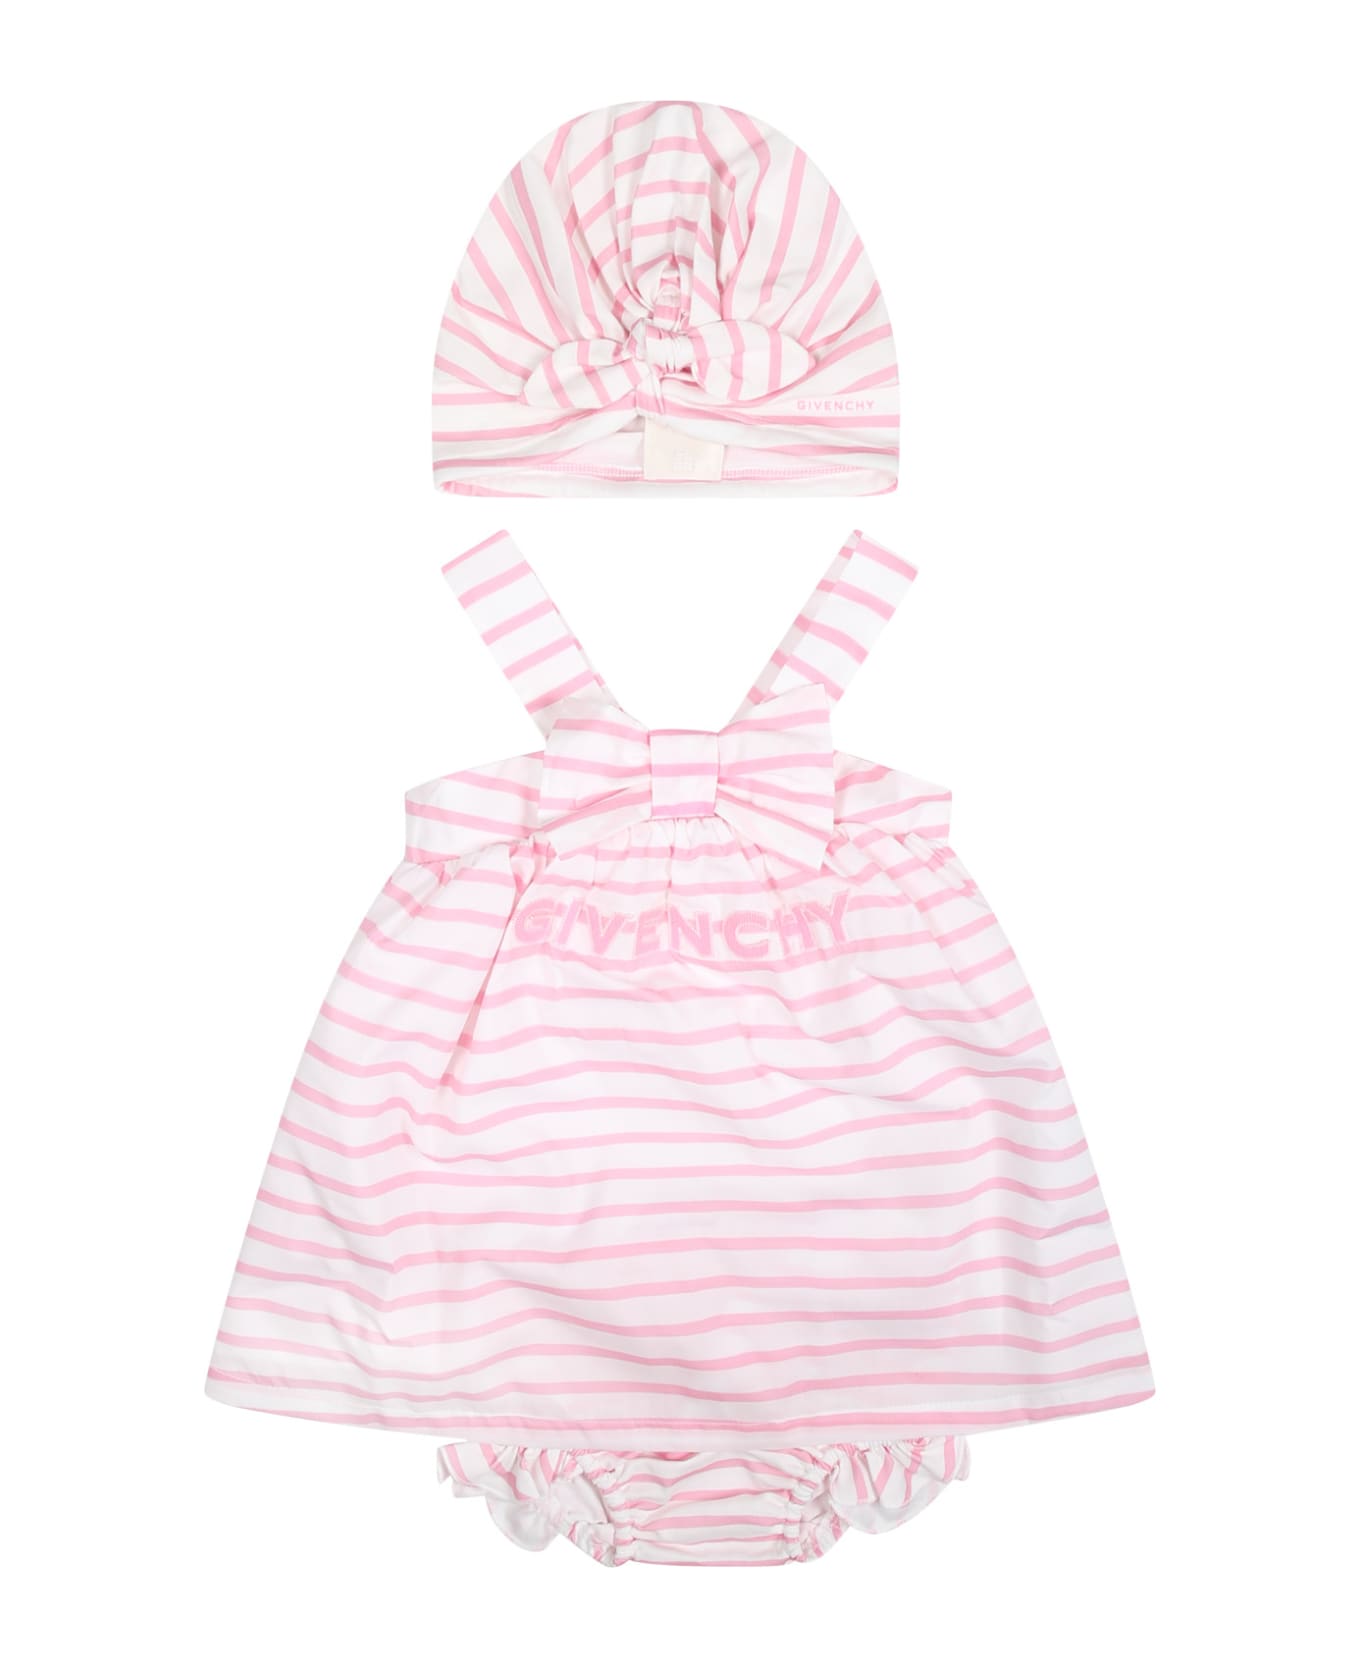 Givenchy Pink Dress For Baby Girl With Stripes - Pink ウェア